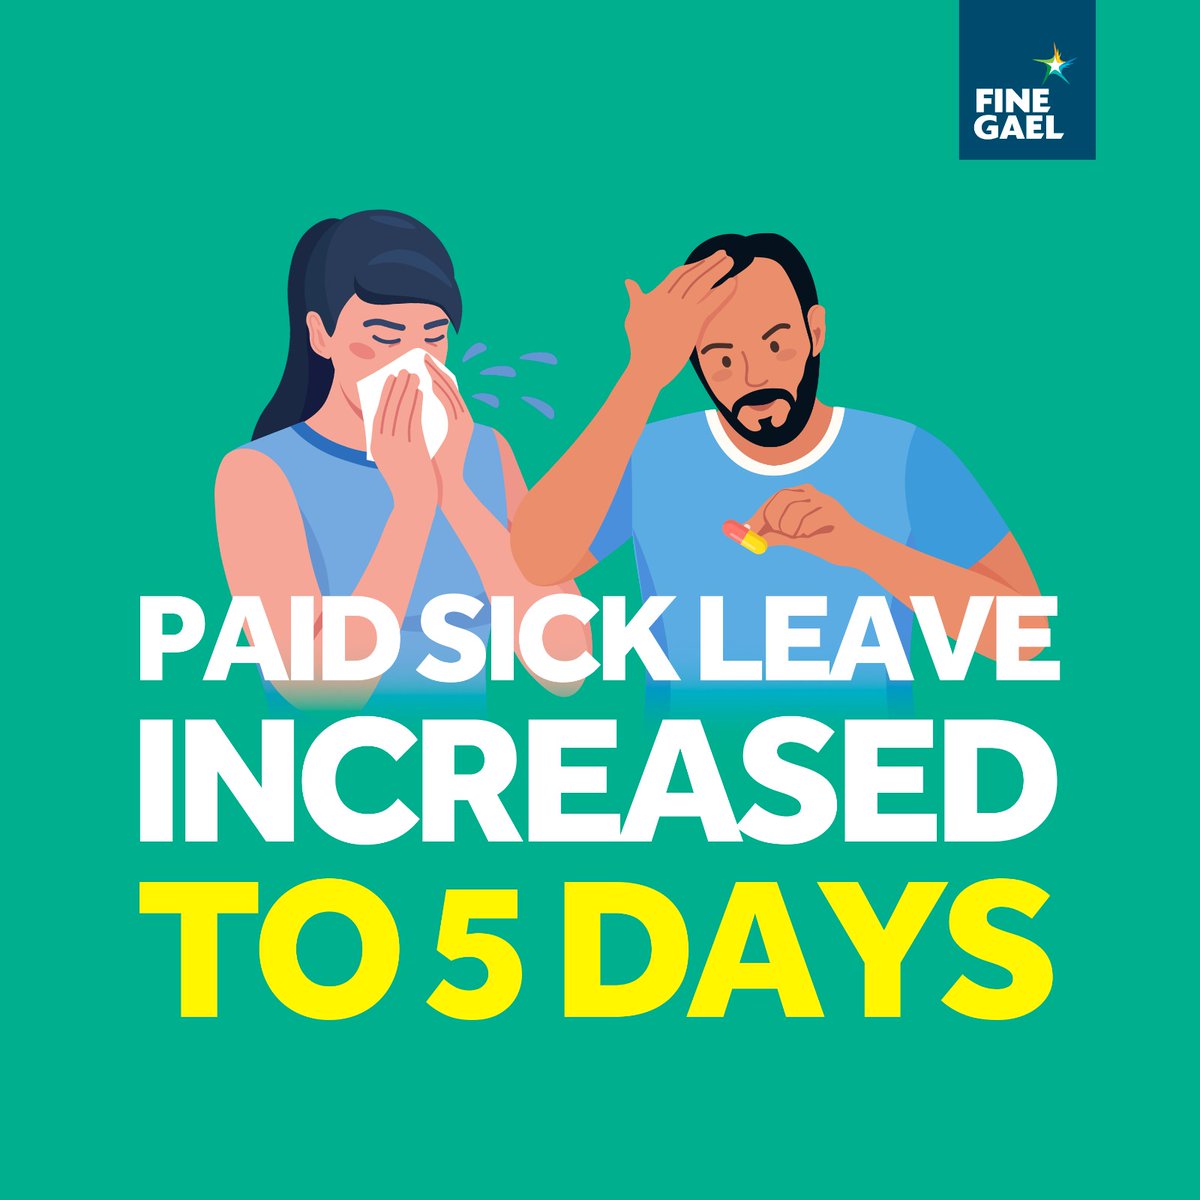 🤒 From 1st January, the entitlement to paid sick leave will increase from three days to FIVE DAYS. No one should be afraid to take time off work when they are sick.